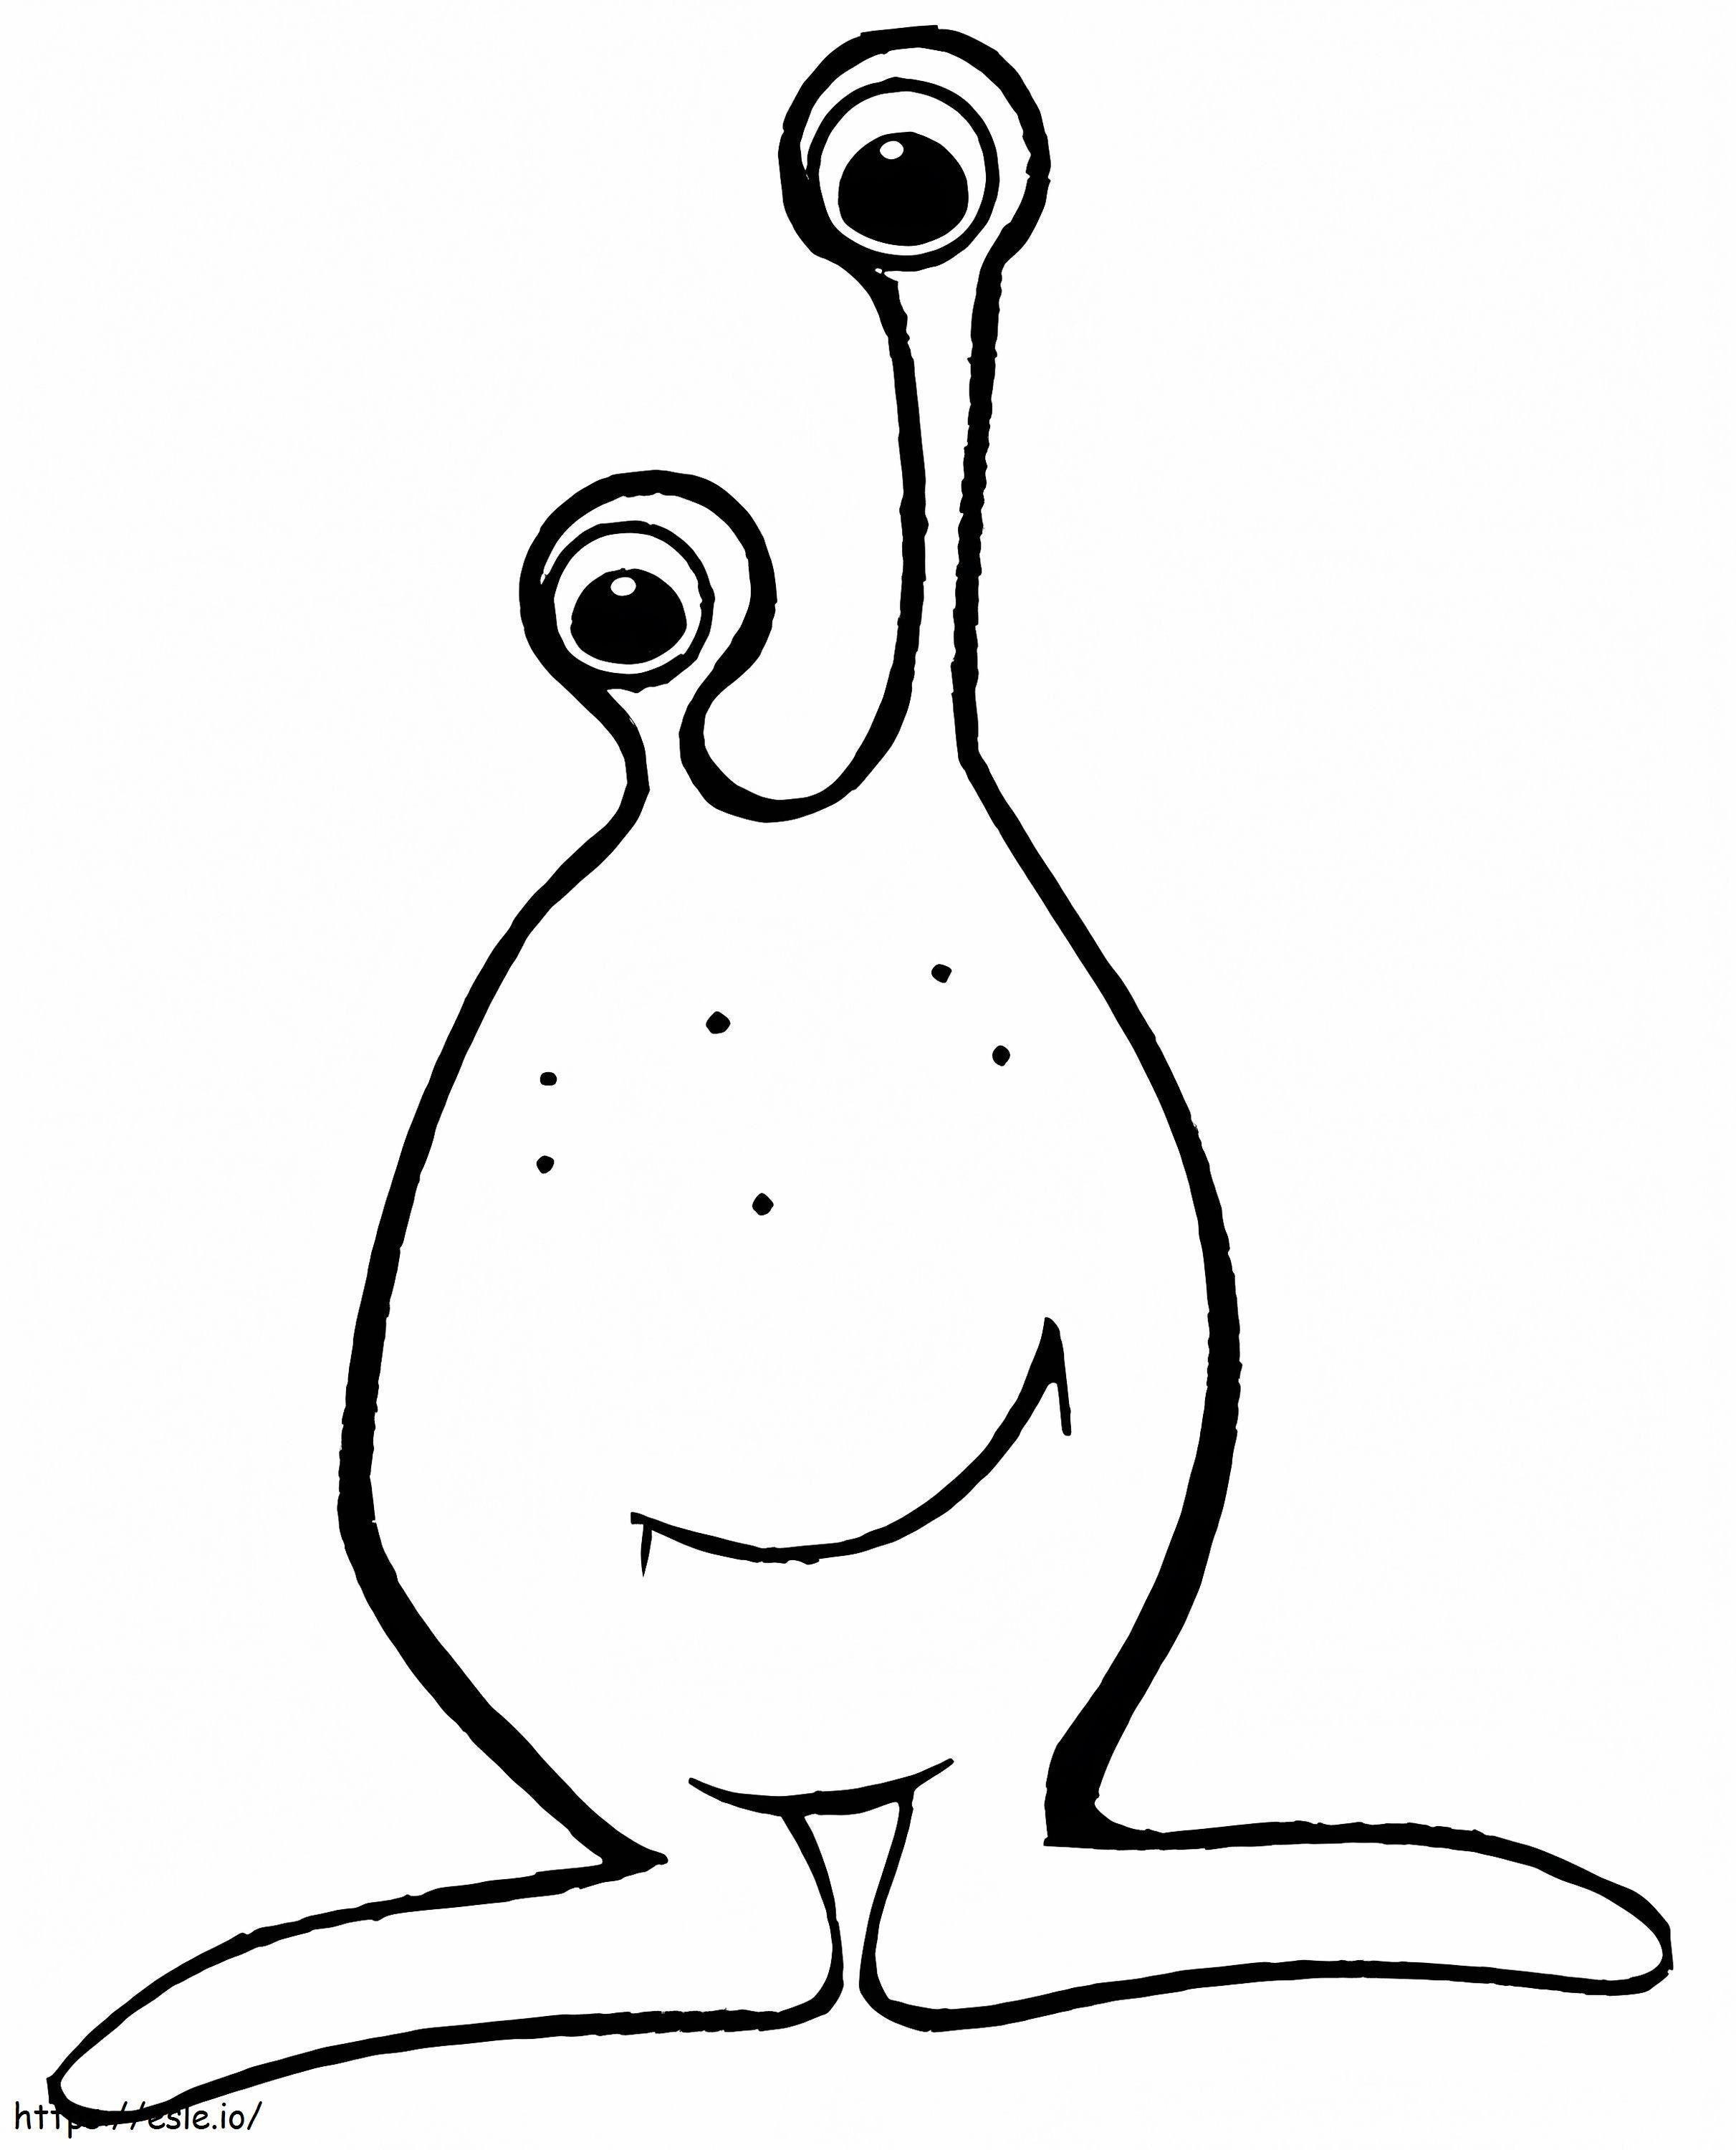 Small Alien coloring page